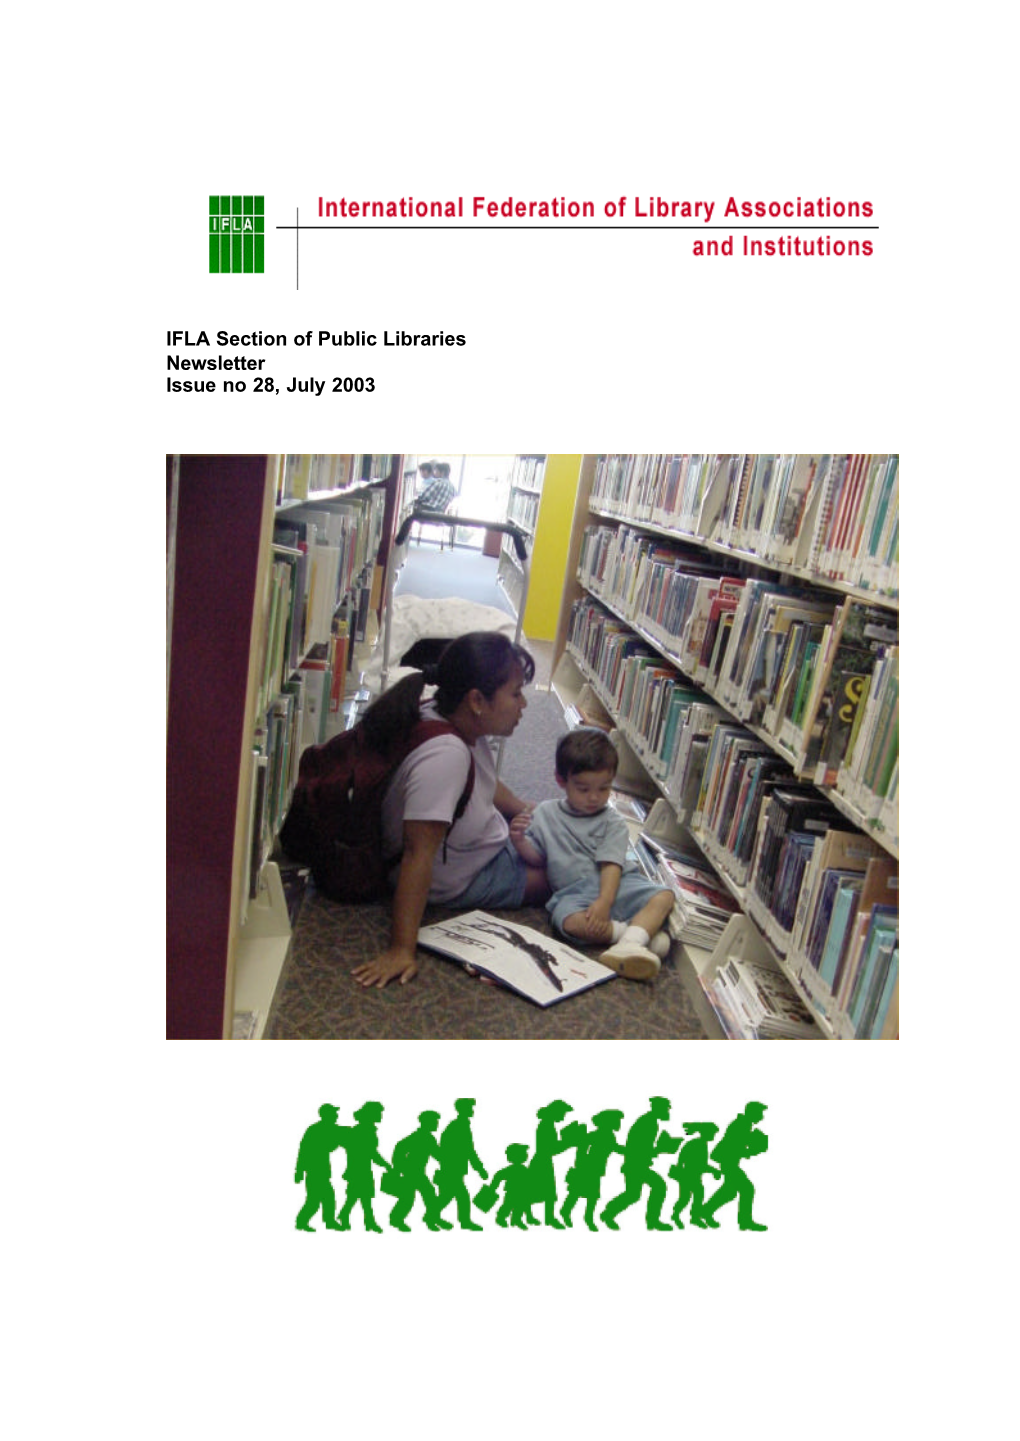 IFLA Section of Public Libraries Newsletter Issue No 28, July 2003